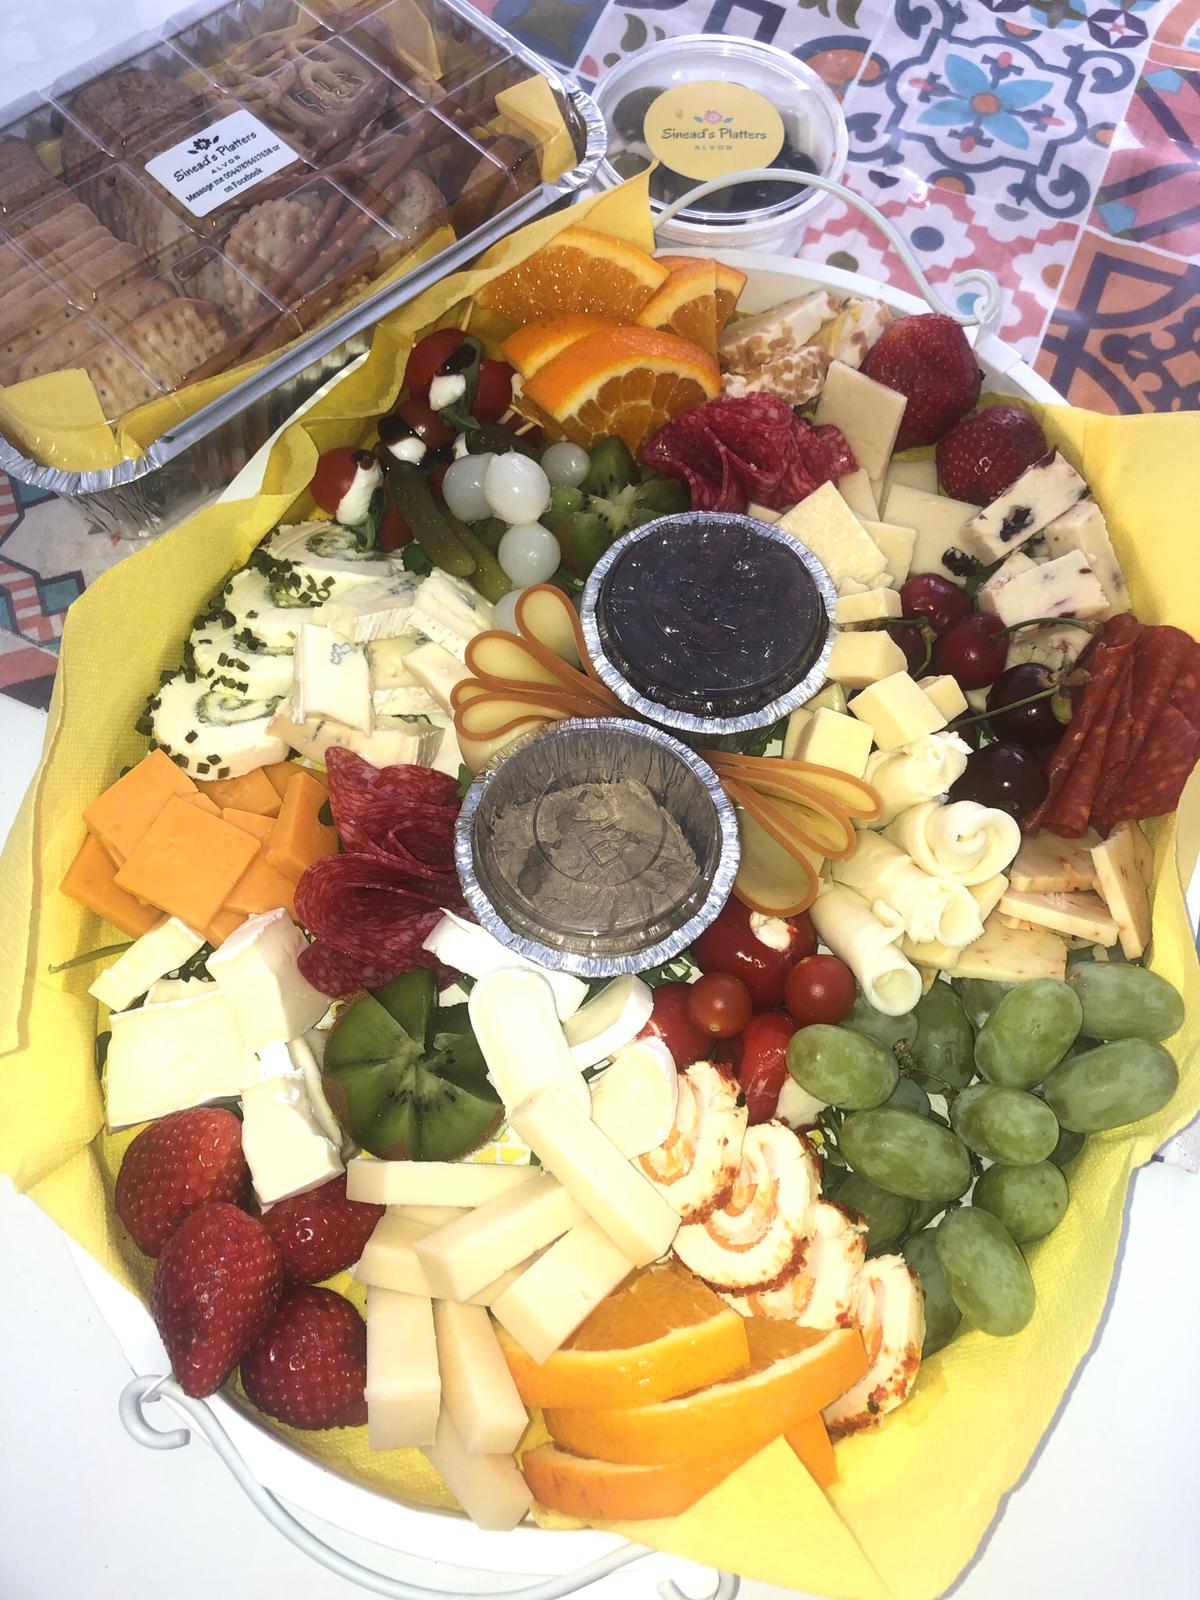 A delicious platter will be served.  With a sellection of cheeses, fruit, salame, presunto, pates, ham and crackers.